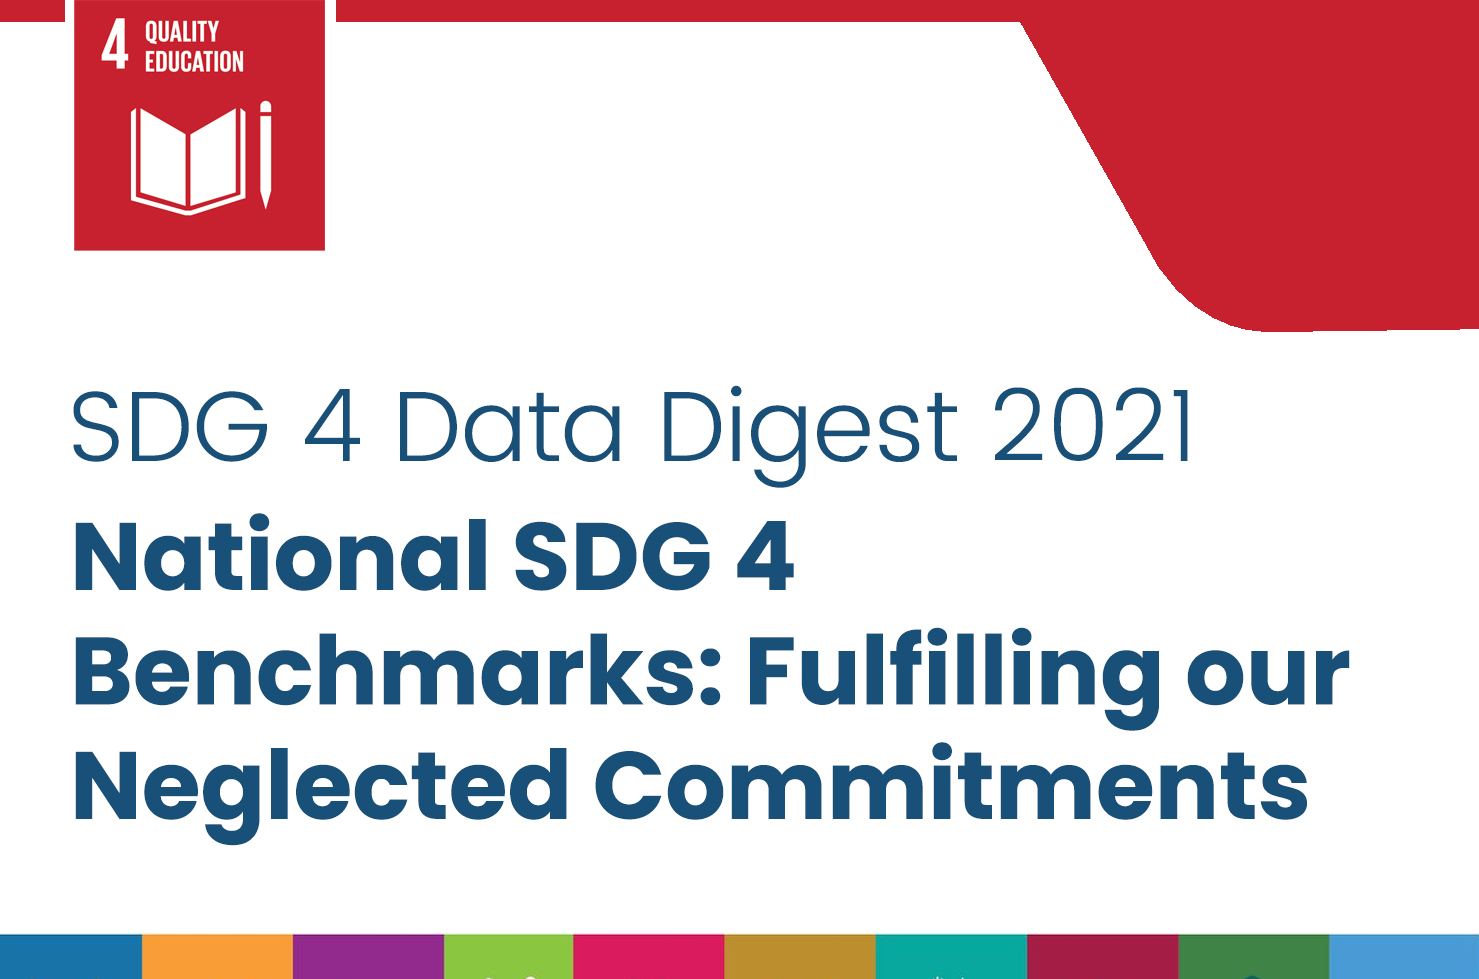 SDG 4 Data Digest 2021 - National SDG 4 Benchmarks: Fulfilling our Neglected Commitment